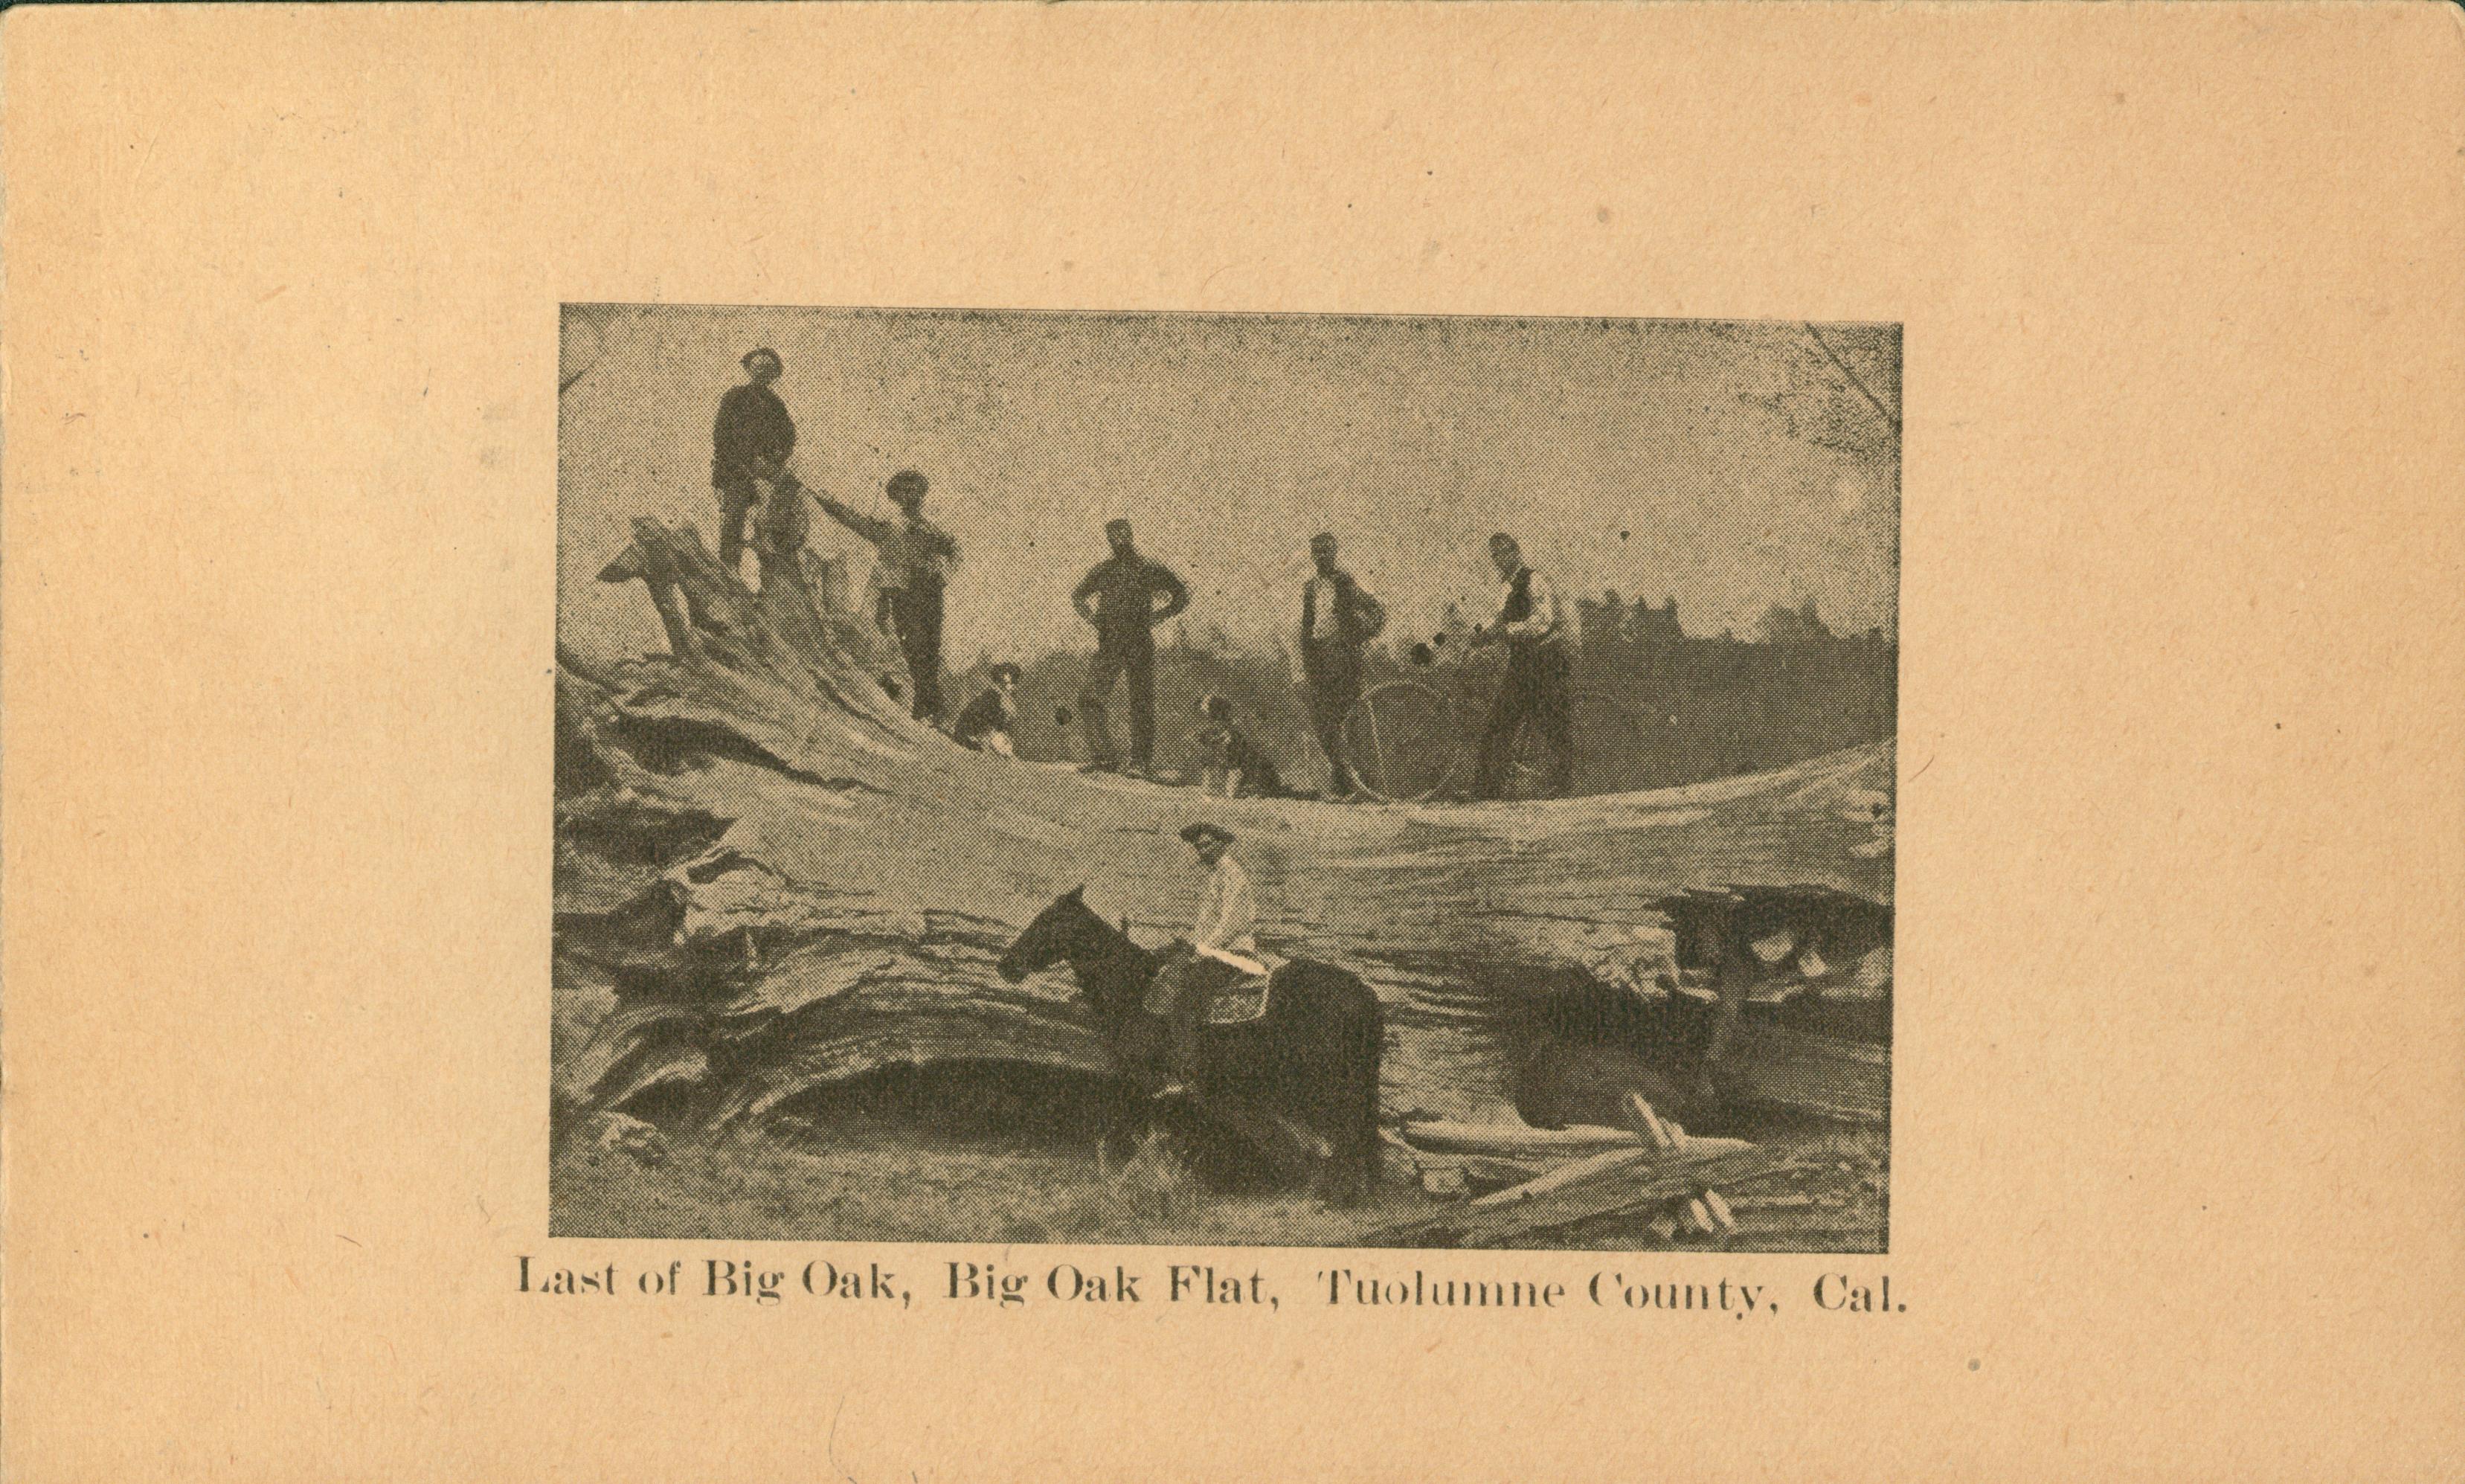 Shows several men and dogs on top of a large fallen oak with a horse and rider posed in front